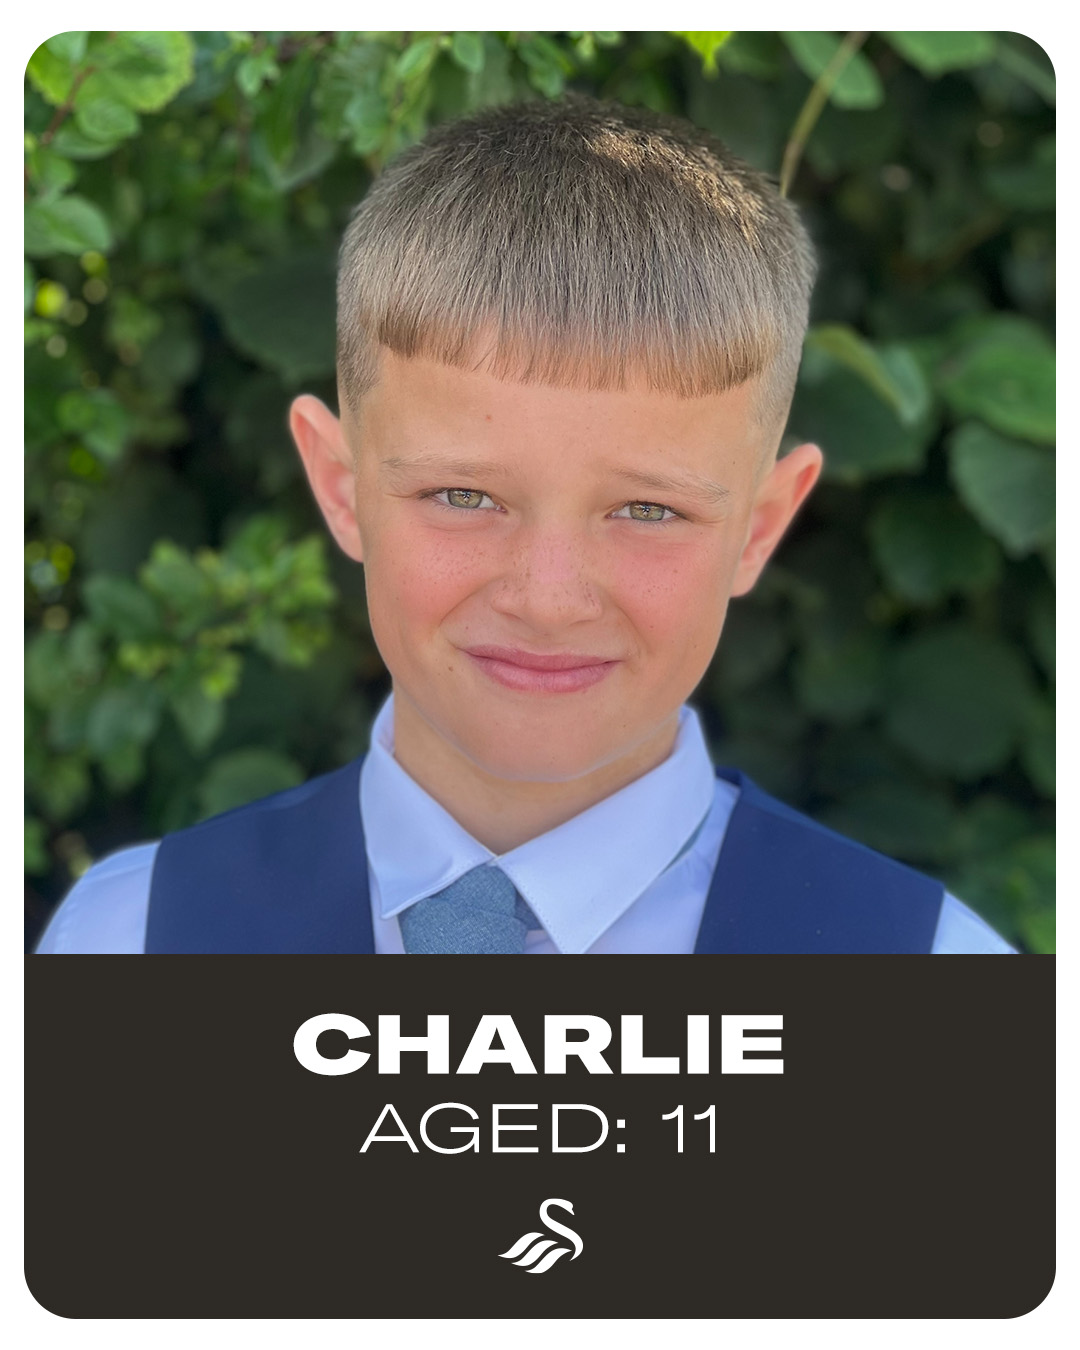 Photograph of Charlie, aged 11